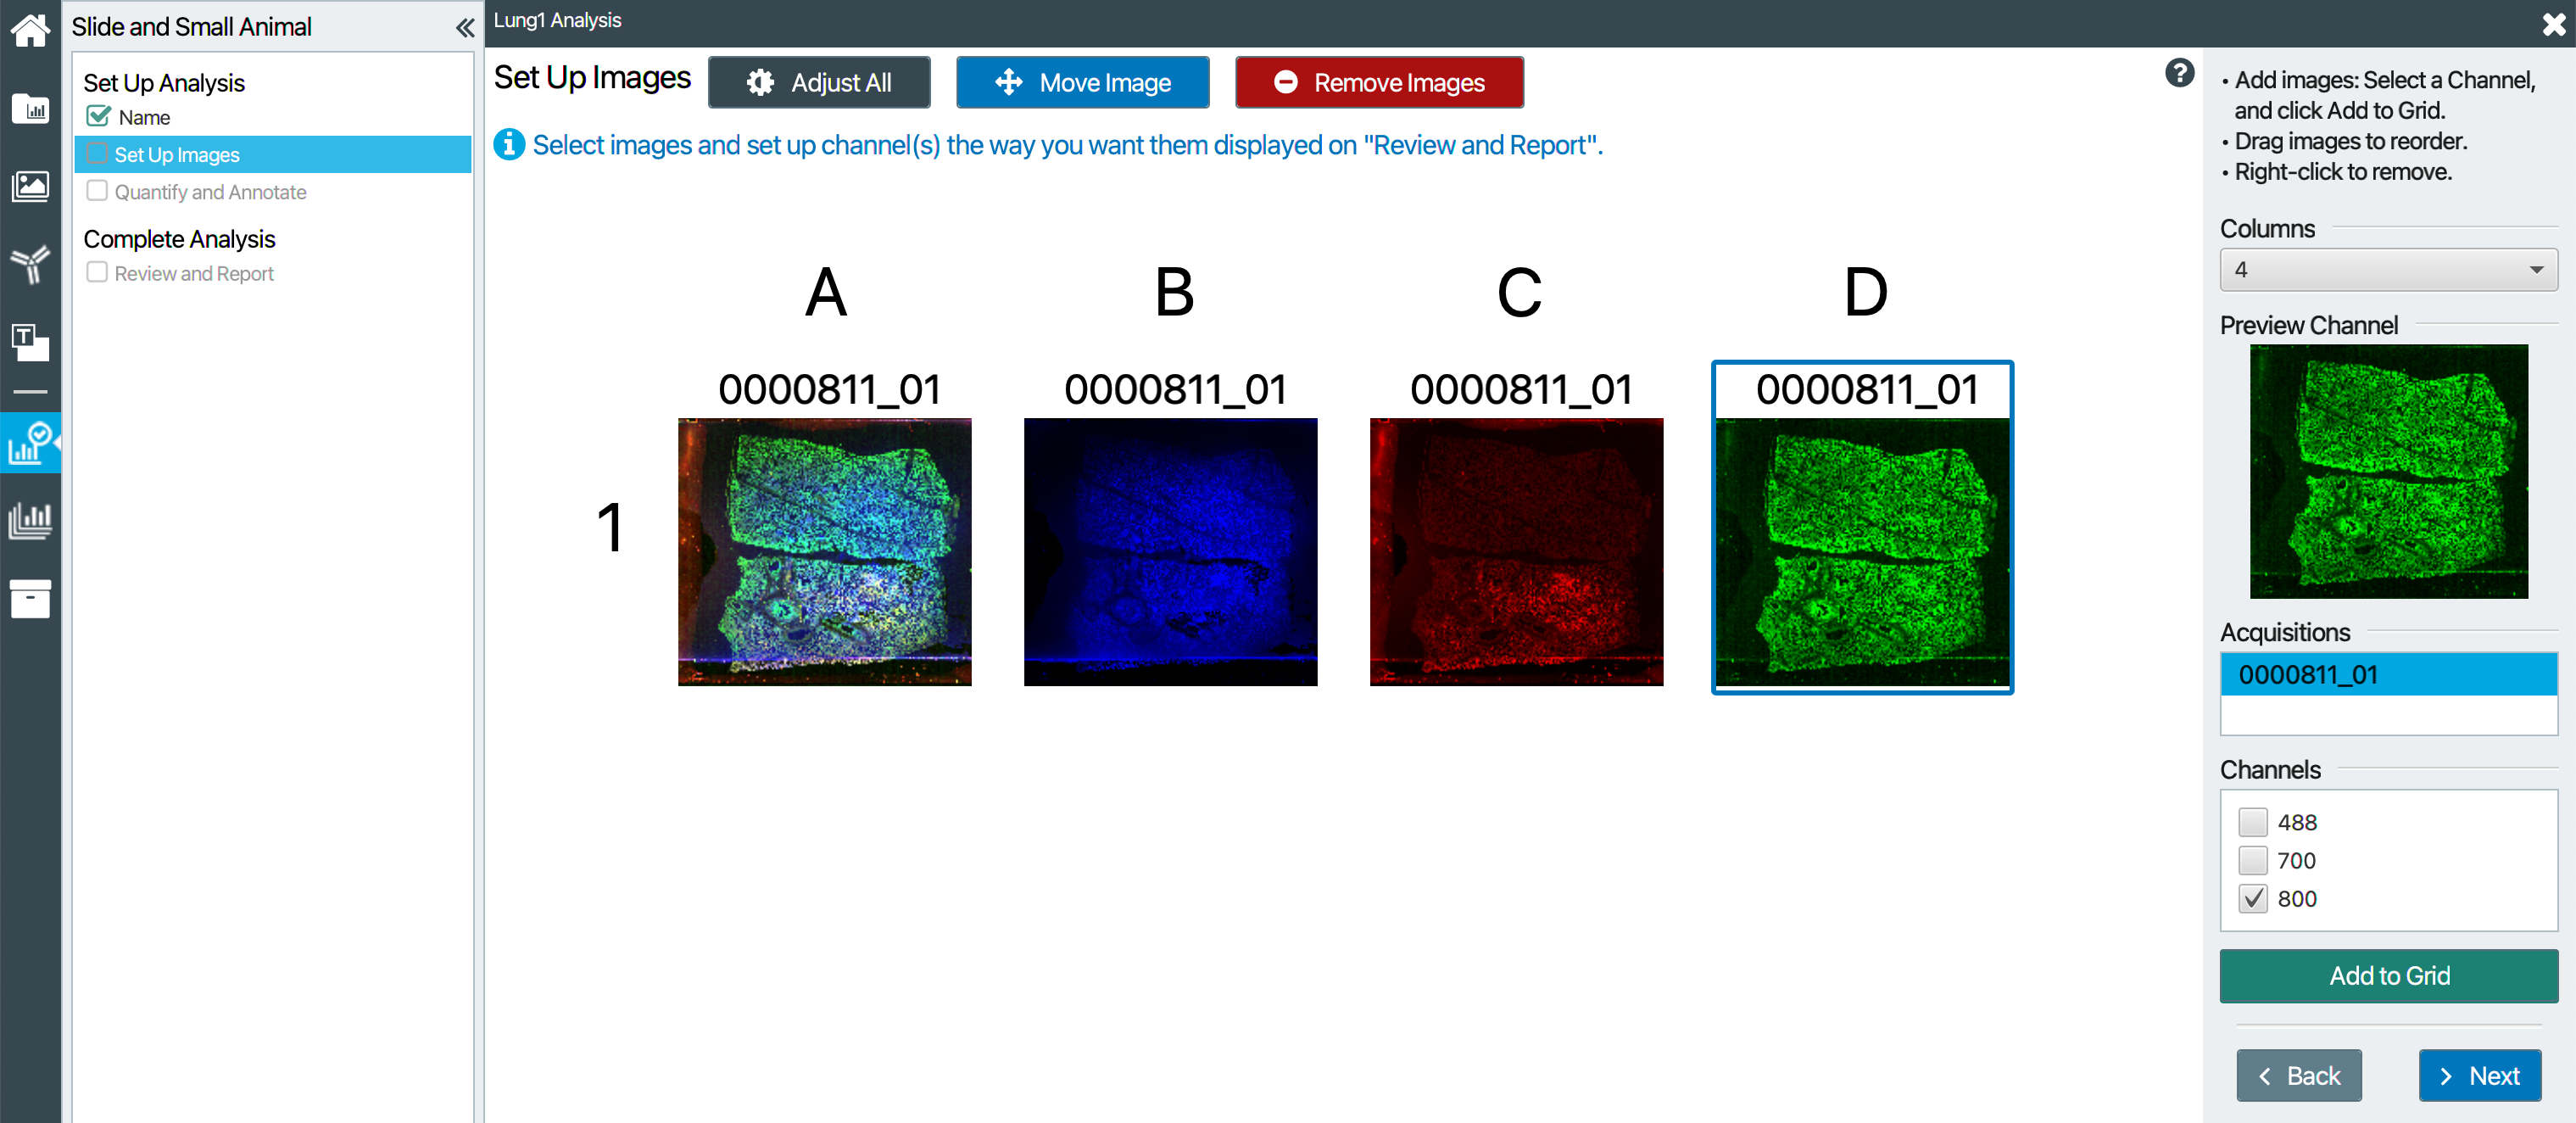 The Empiria Studio Set up images page with a slide acquisition arranged with all image channels overlaid followed by each channel individually.